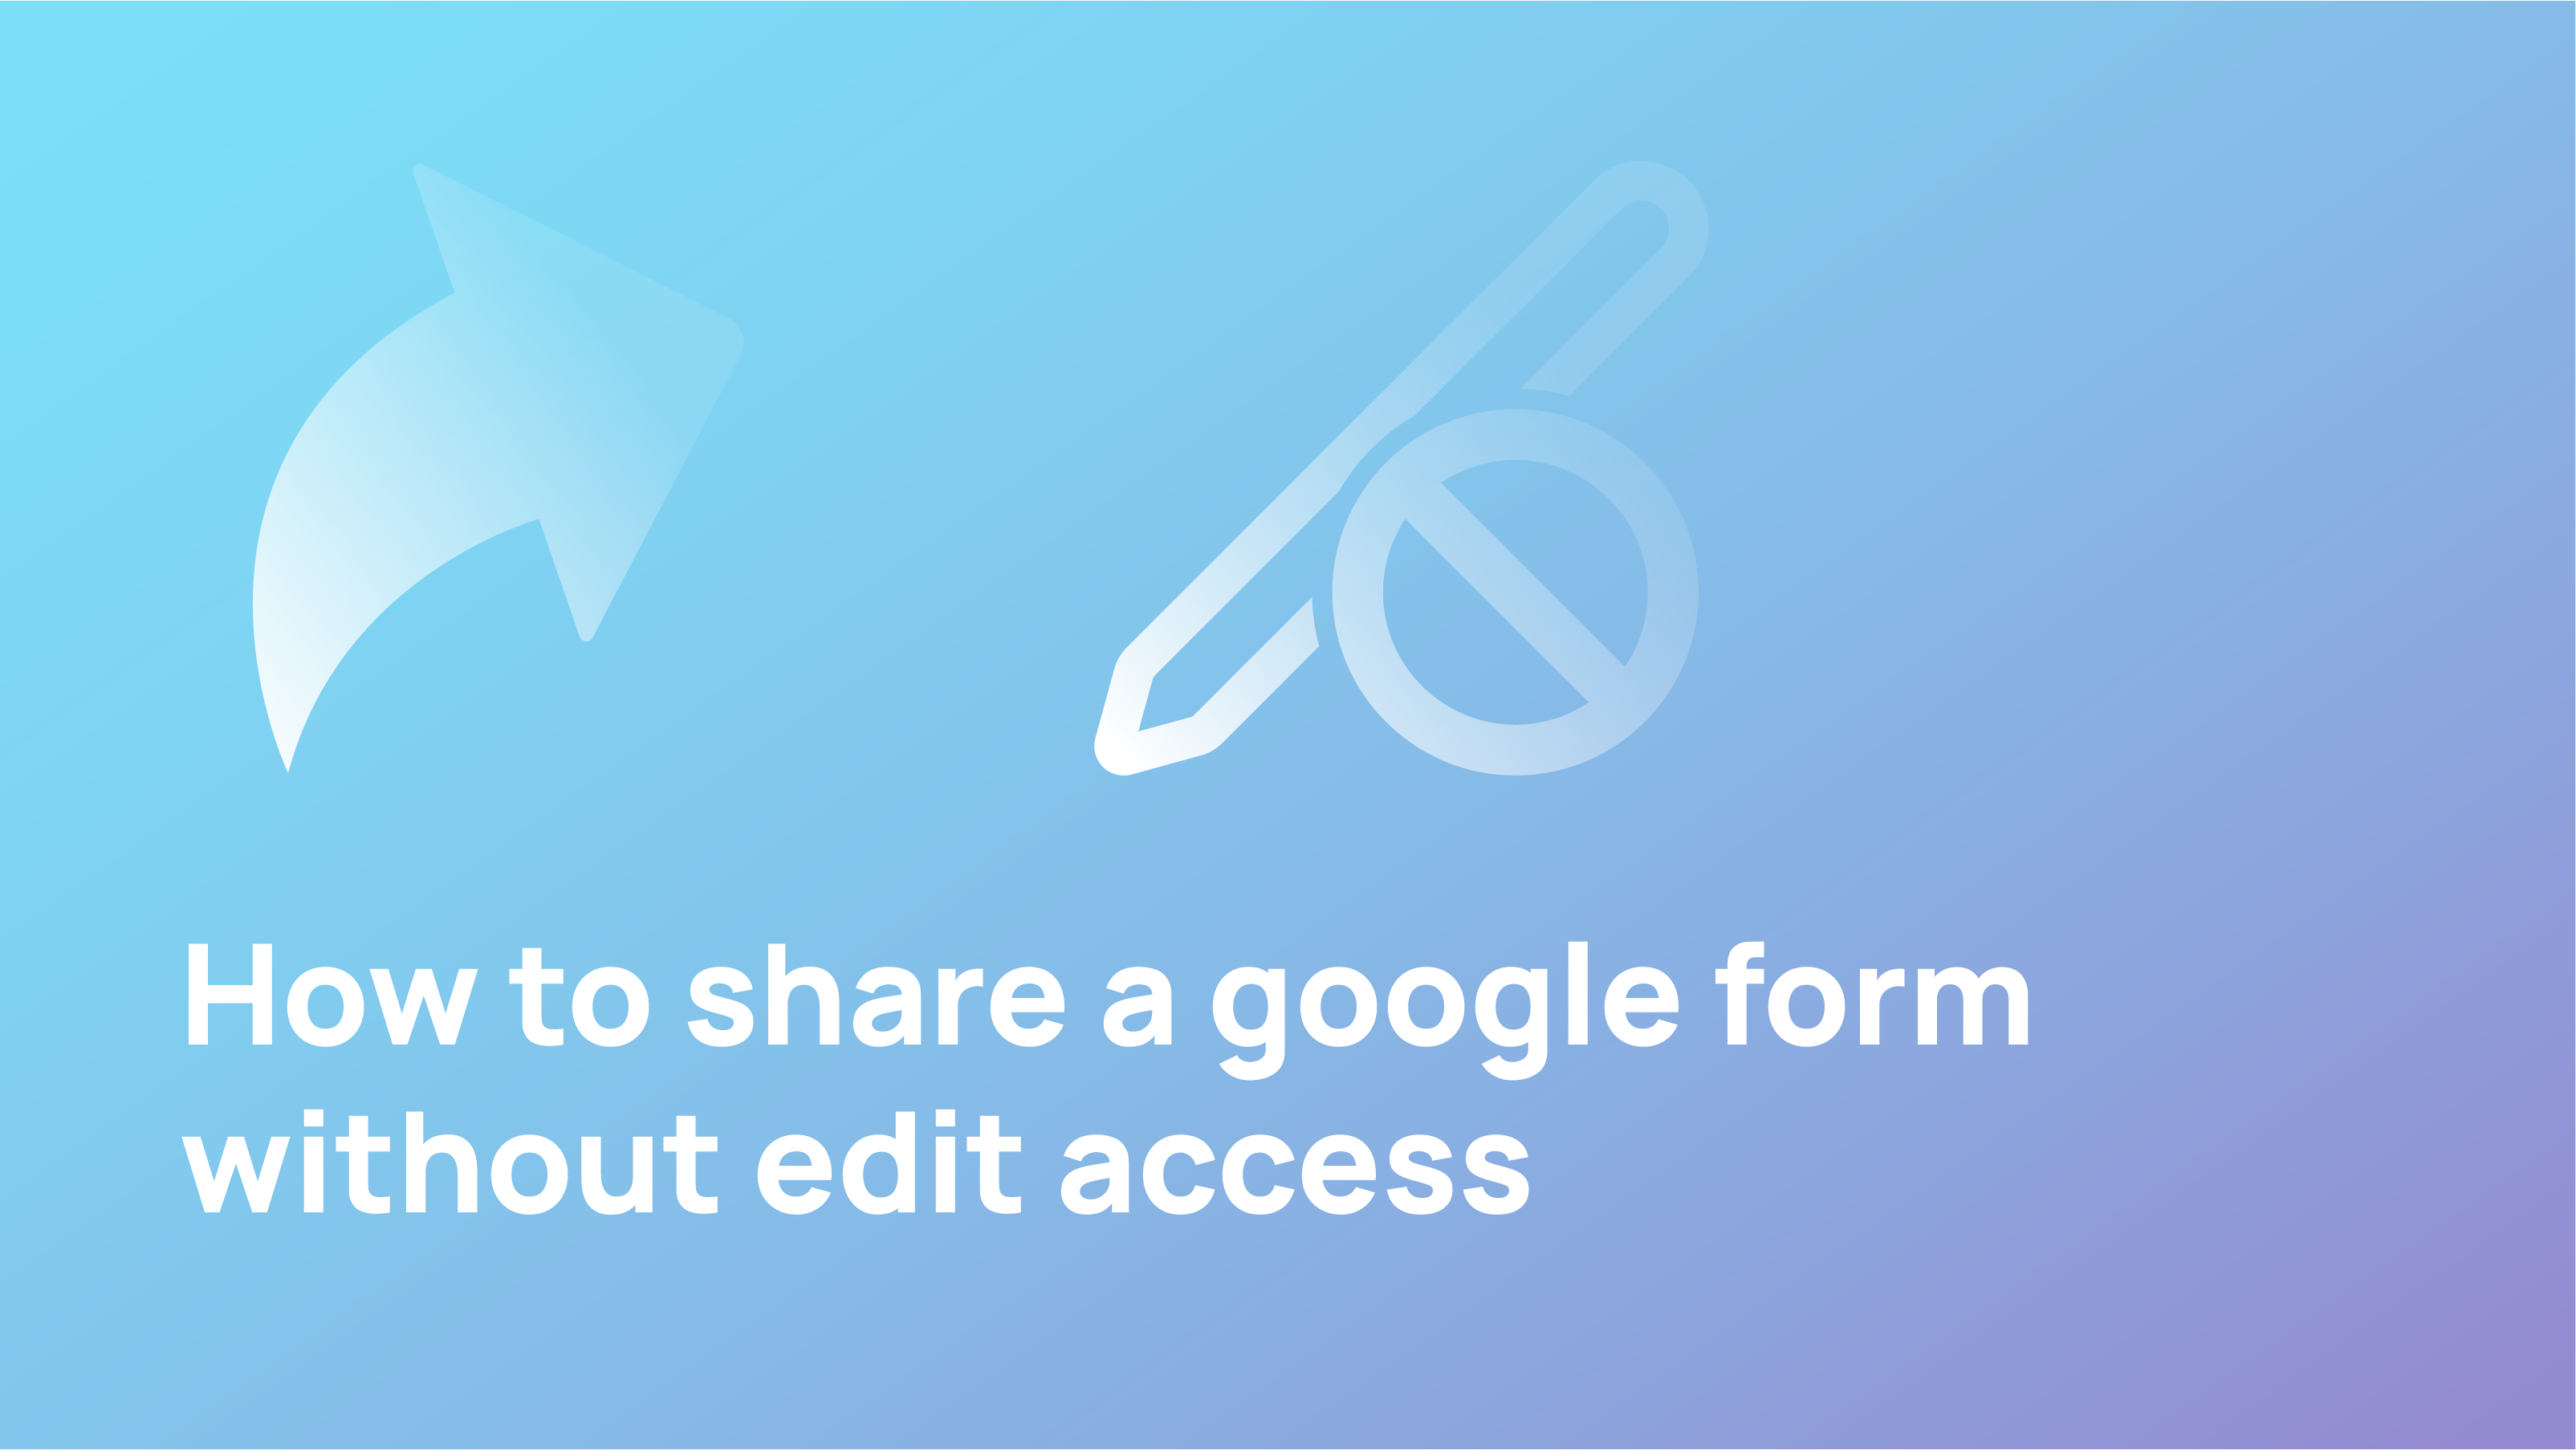 Google Form without edit